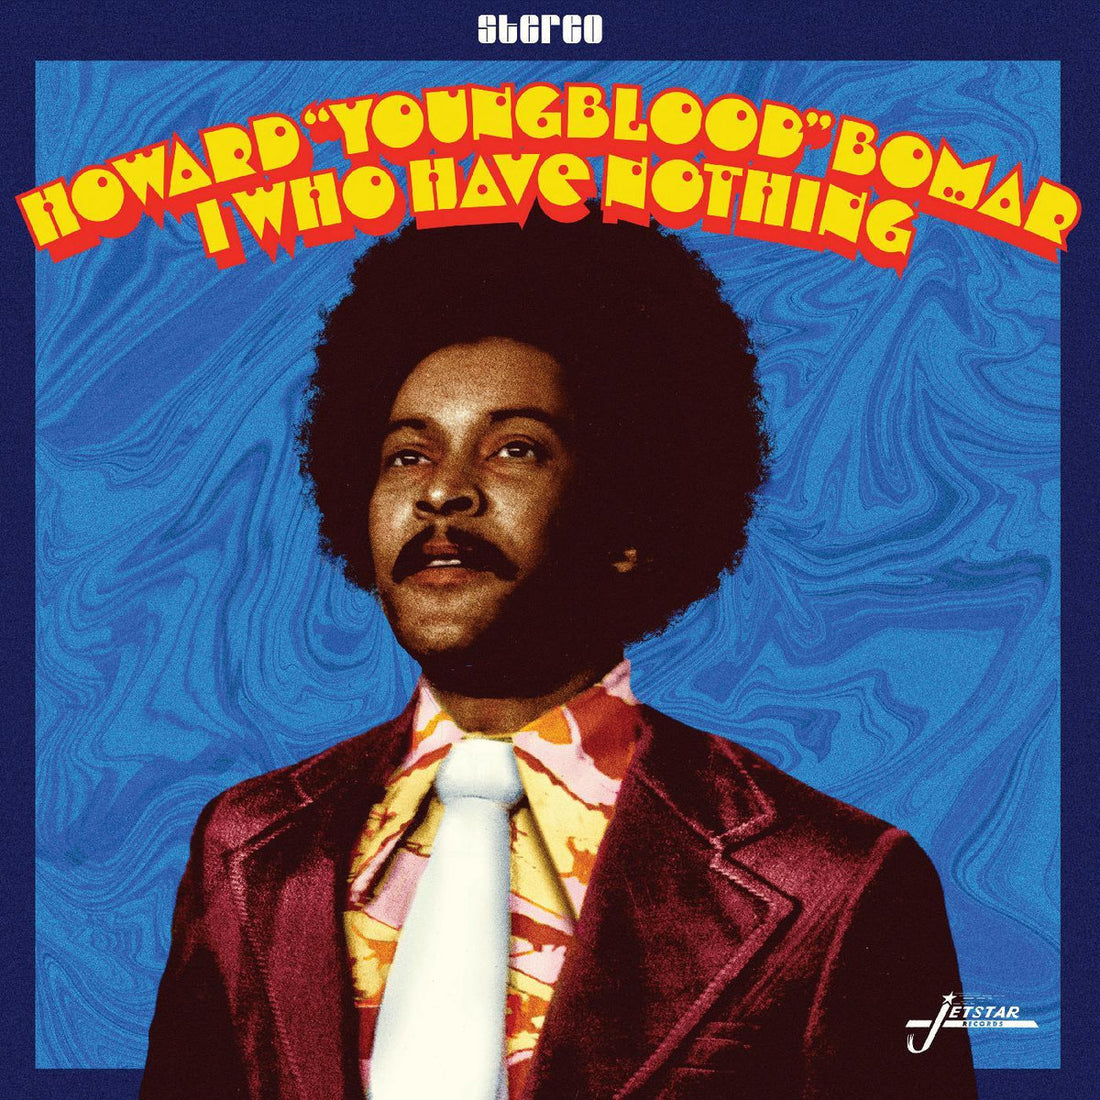 Howard Bomar's I, Who Have Nothing LP